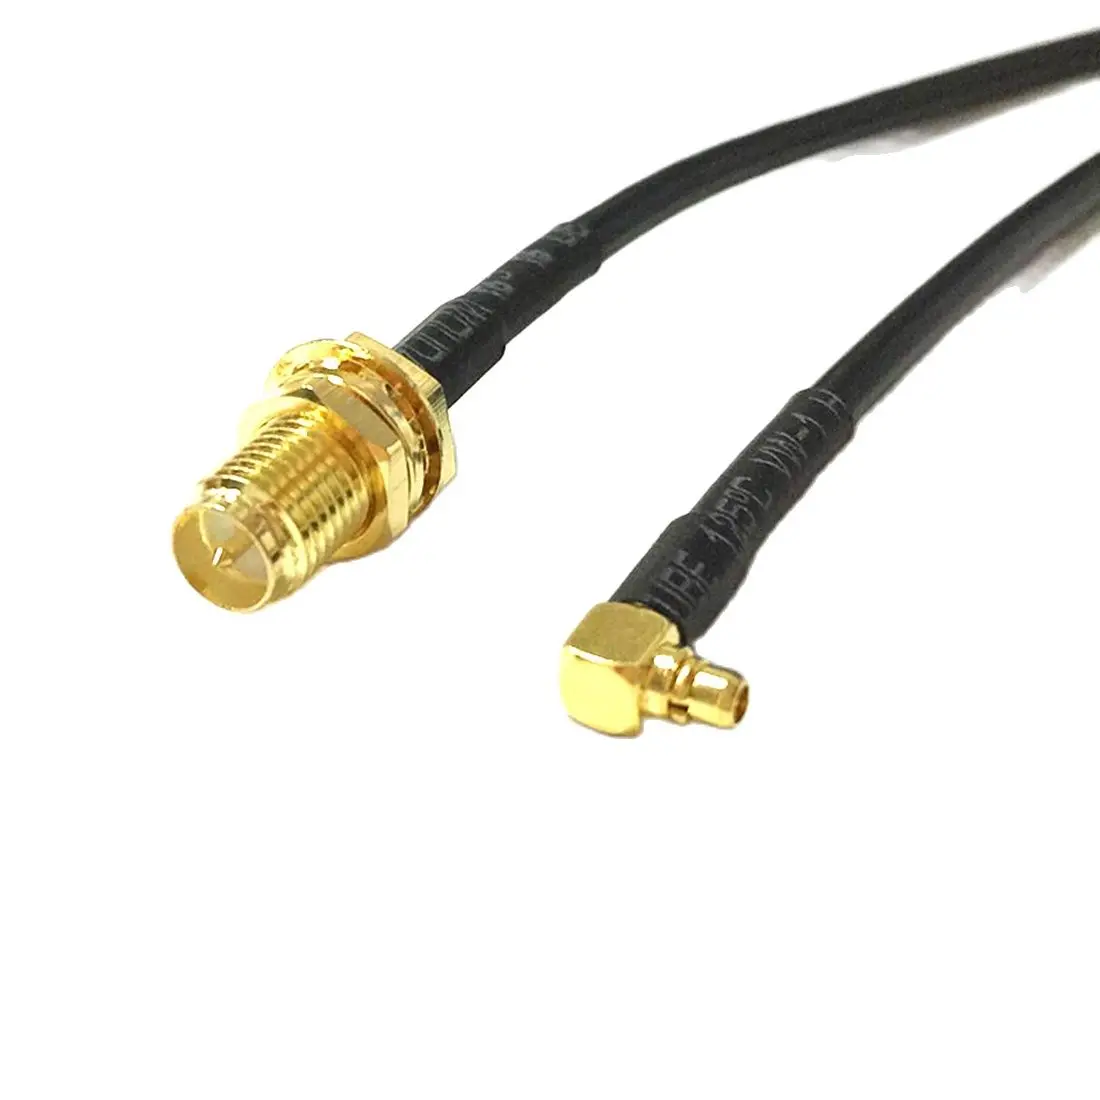 

New Modem Coaxial Cable RP-SMA Female Jack Nut Switch MMCX Male Plug Right Angle Connector RG174 Pigtail Adapter 20CM 8"